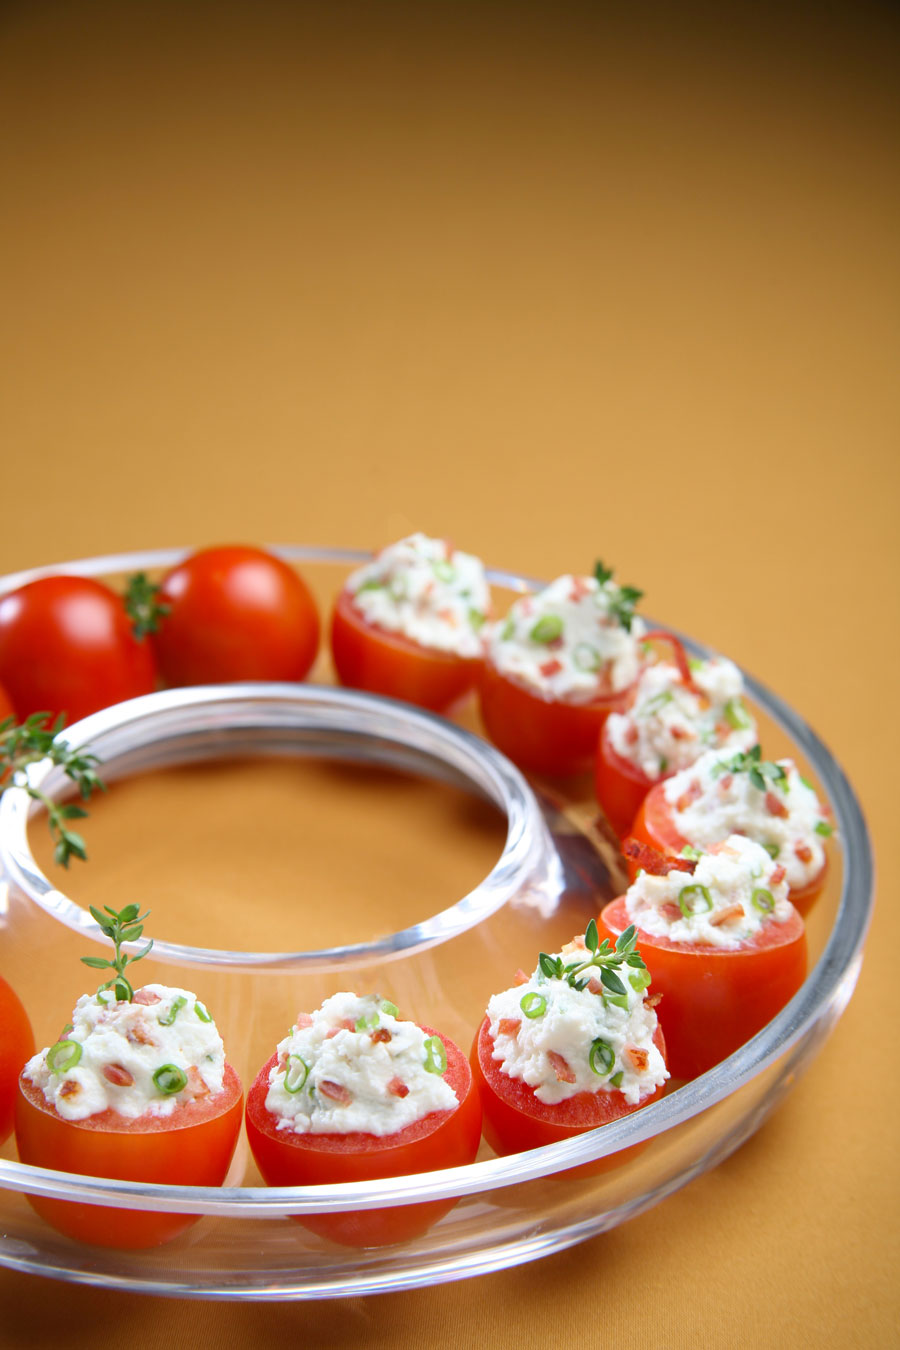 A circular plate filled with cherry tomatoes stuffed with cream cheese and topped with chives and bacon